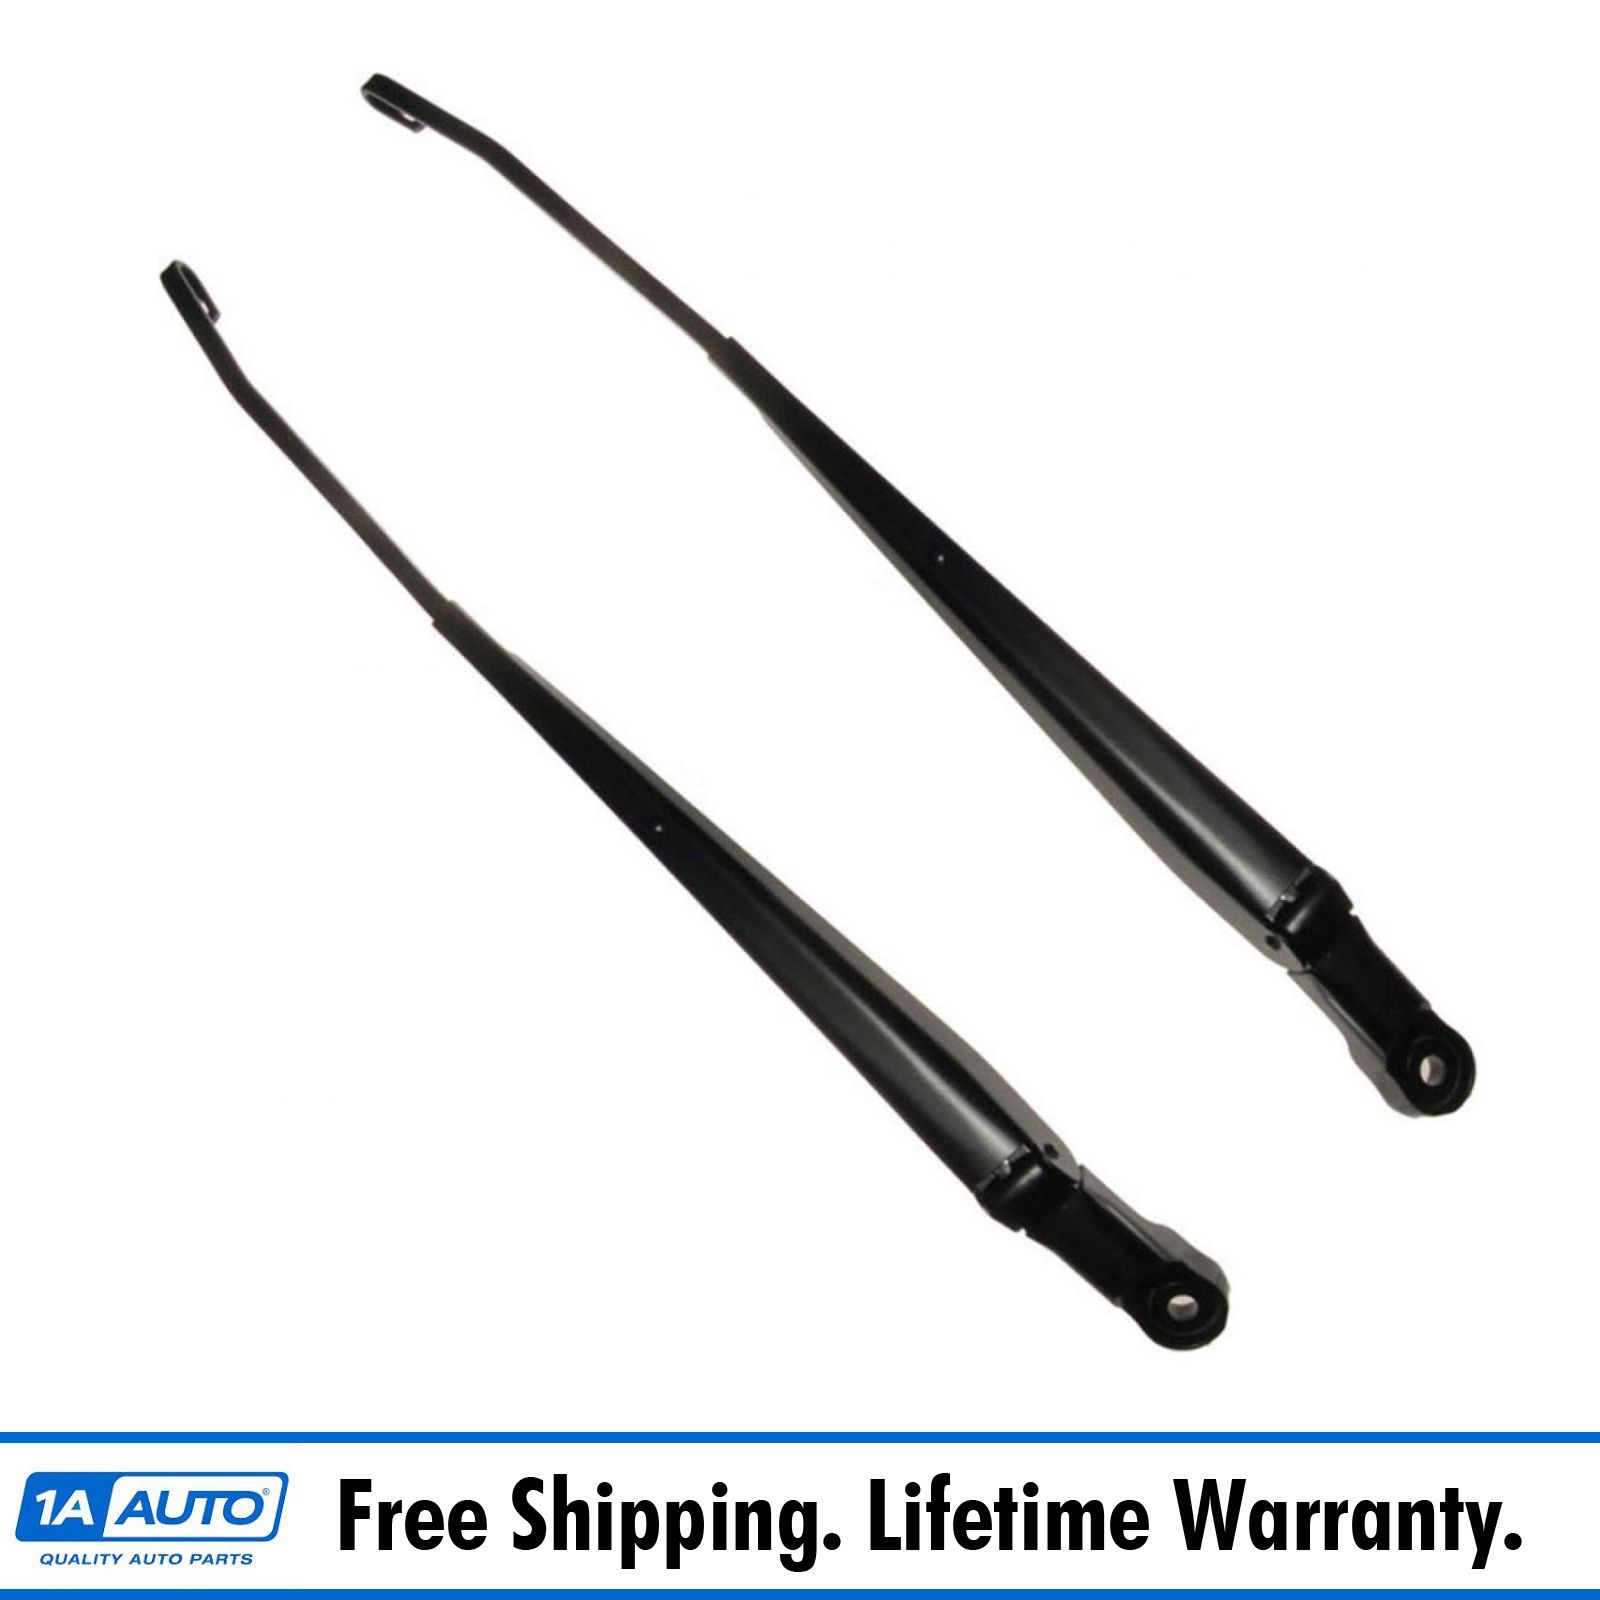 Dorman Wiper Arm Pair F65Z17526BA for Expedition F-150 Blackwood | eBay 2000 Ford F150 Windshield Wipers Not Working